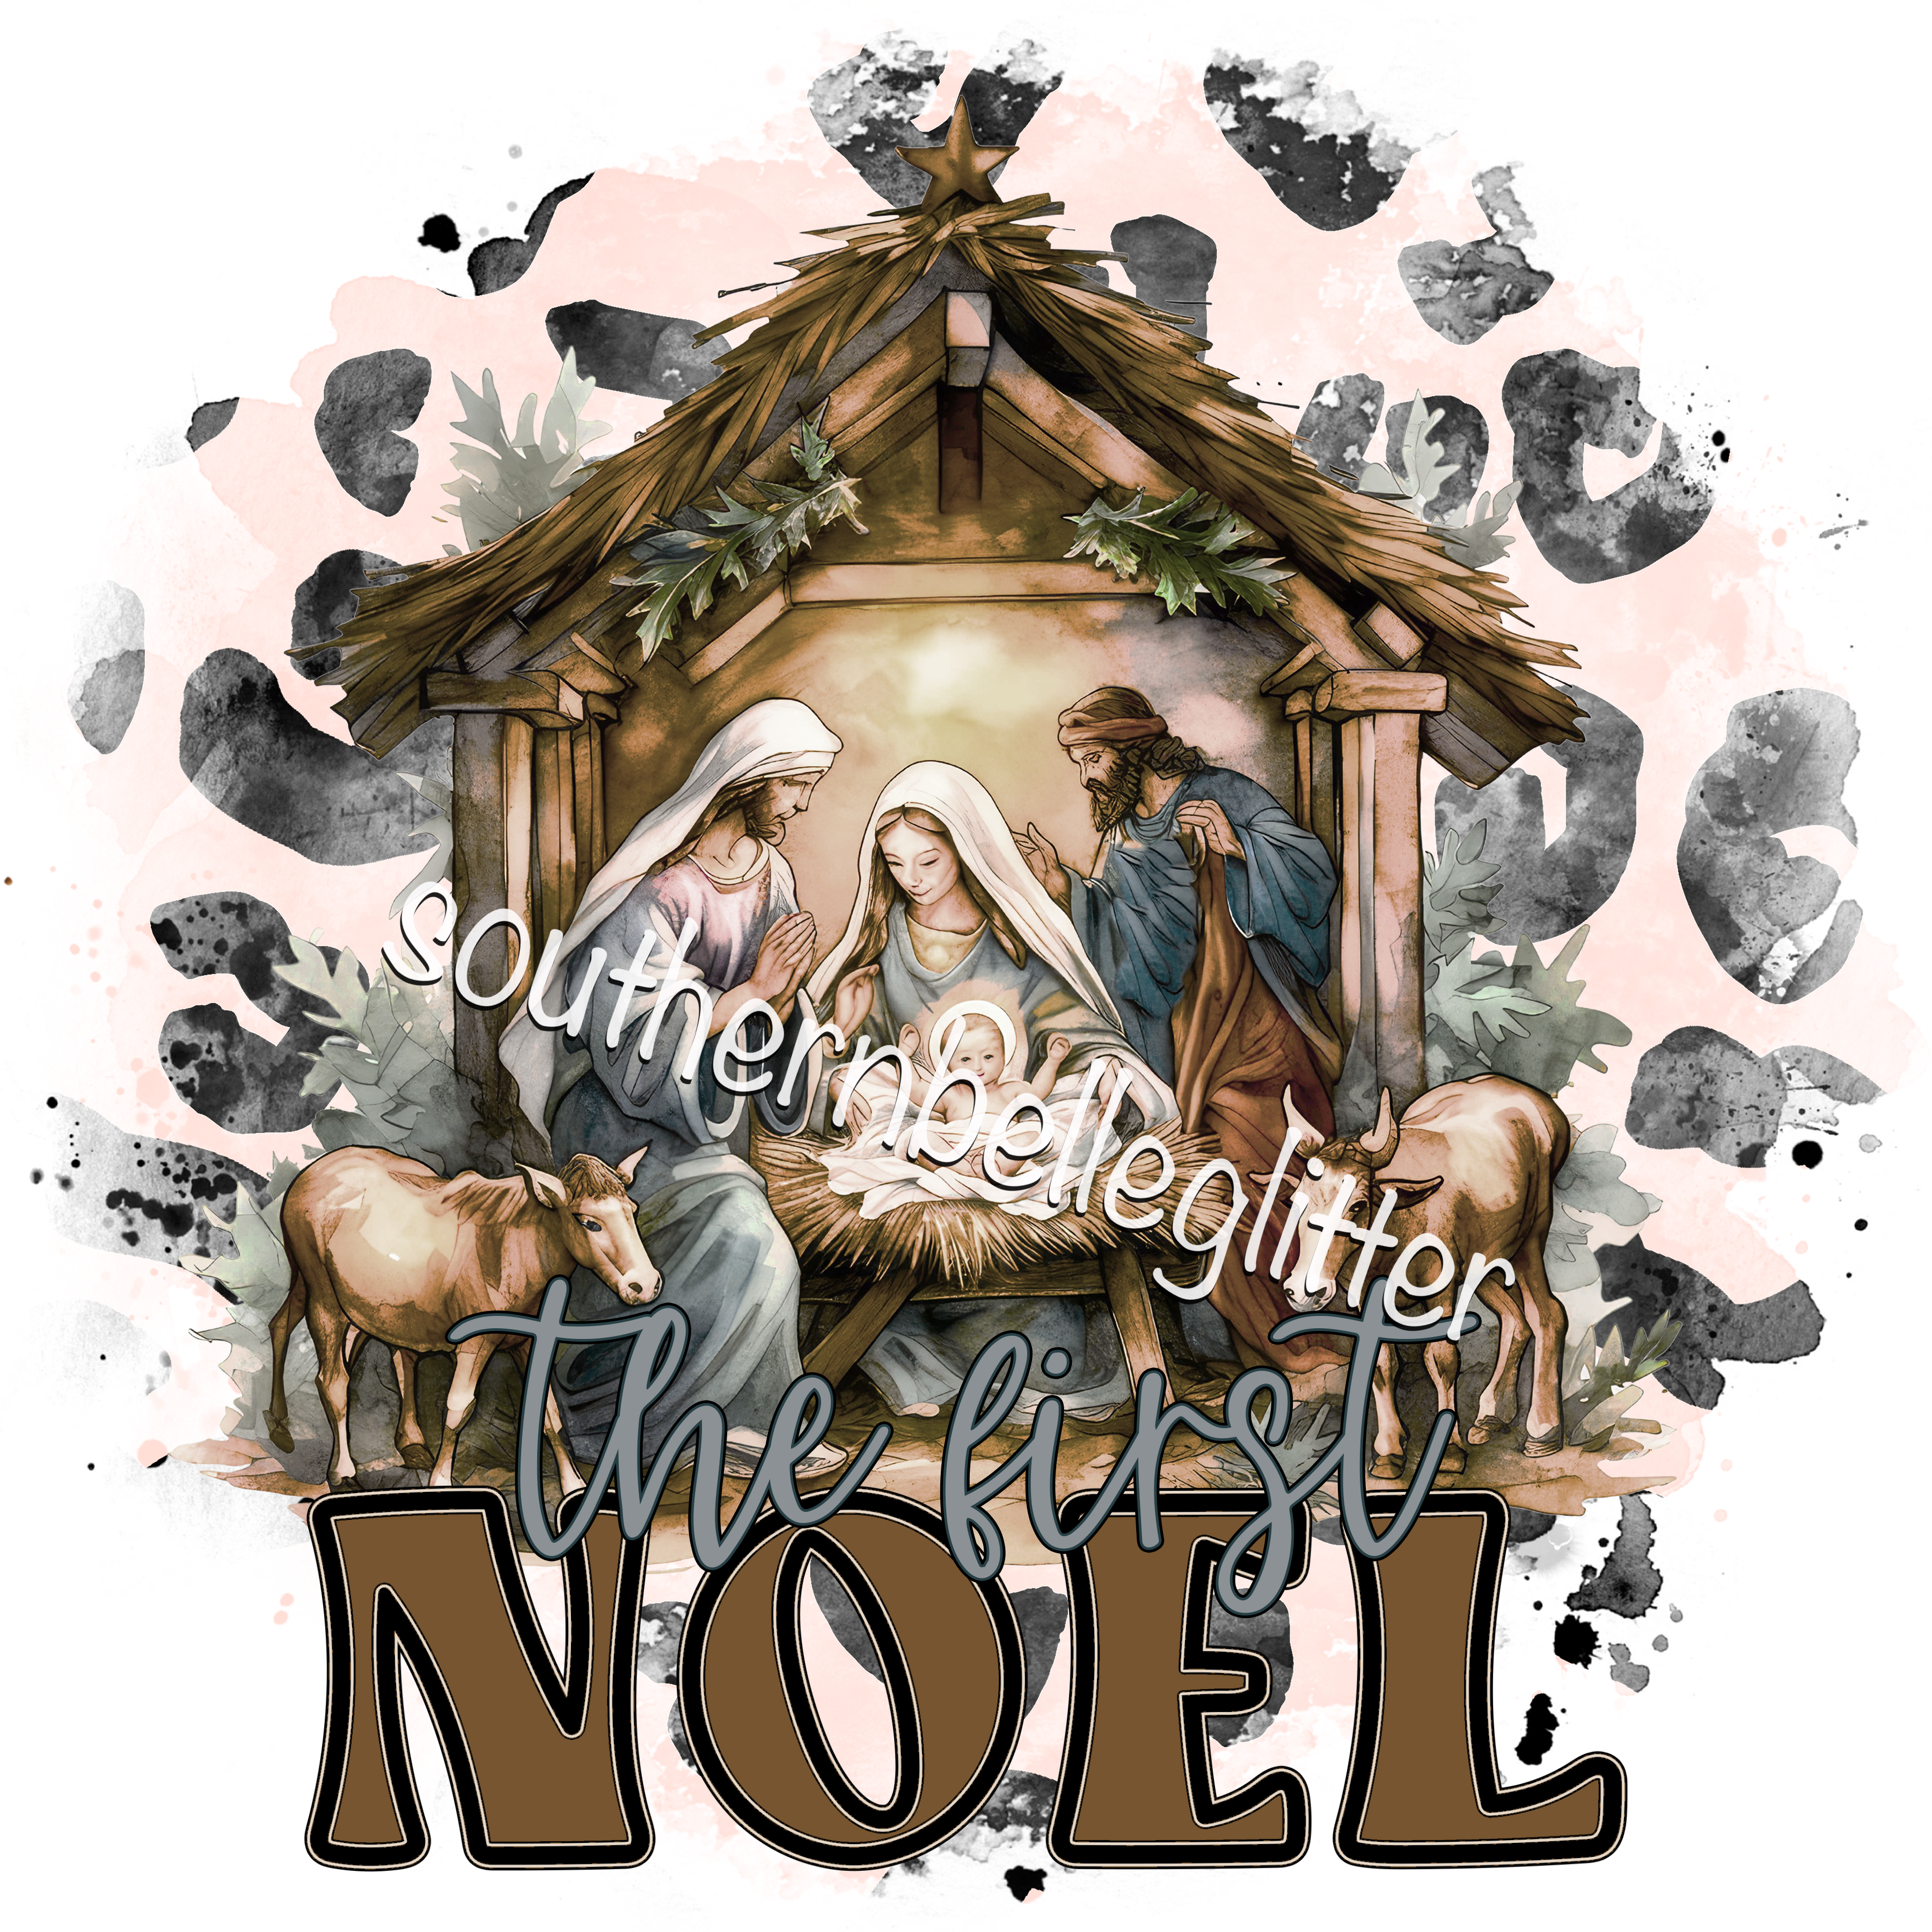 The first Noel